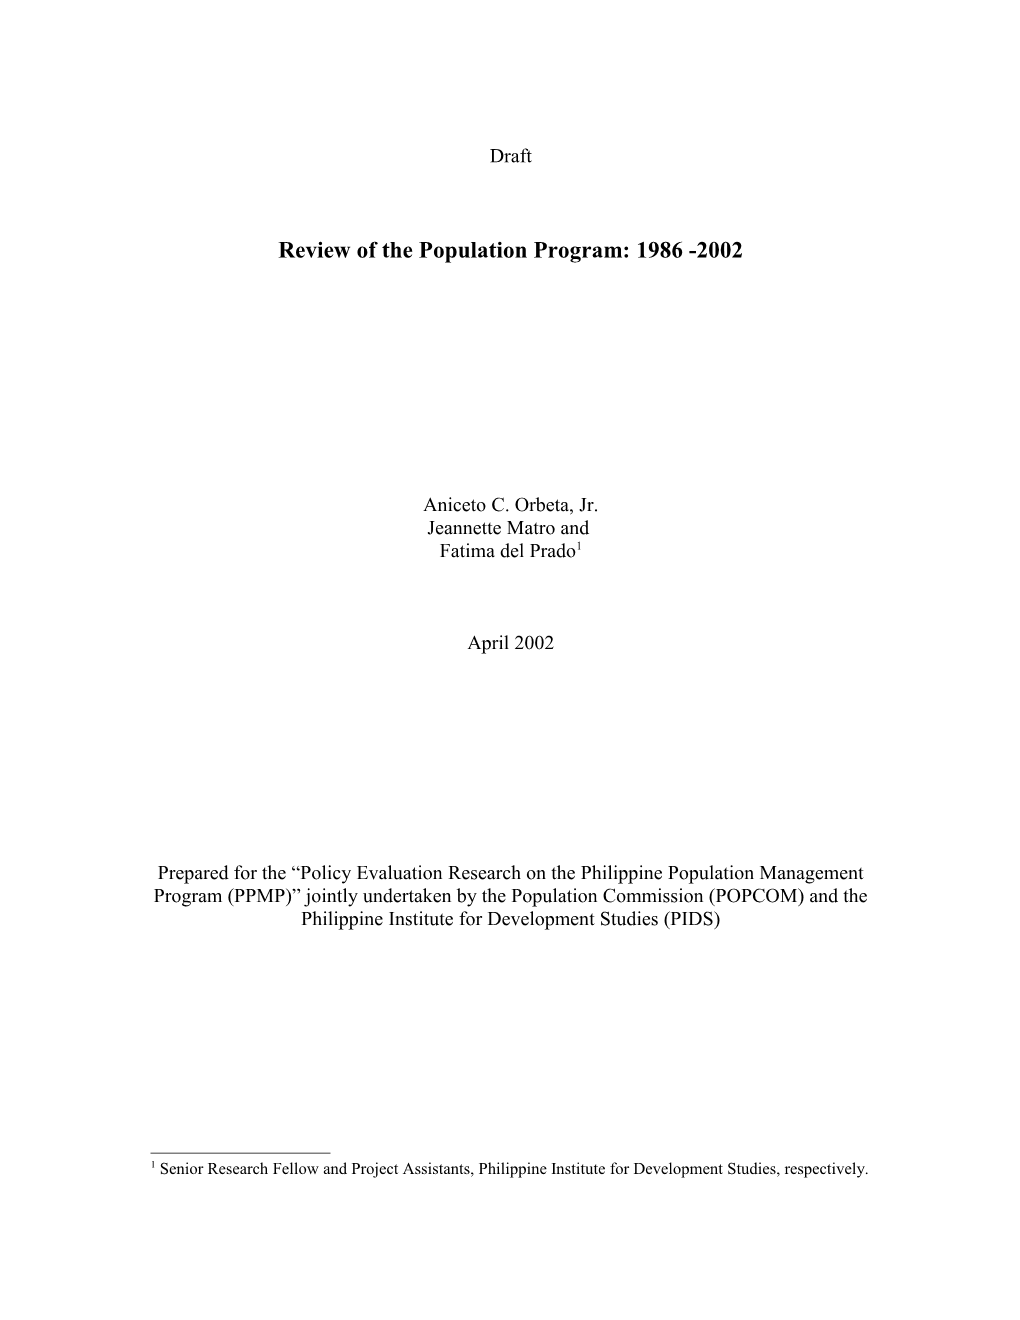 Review of the Population Program: 1986-Present